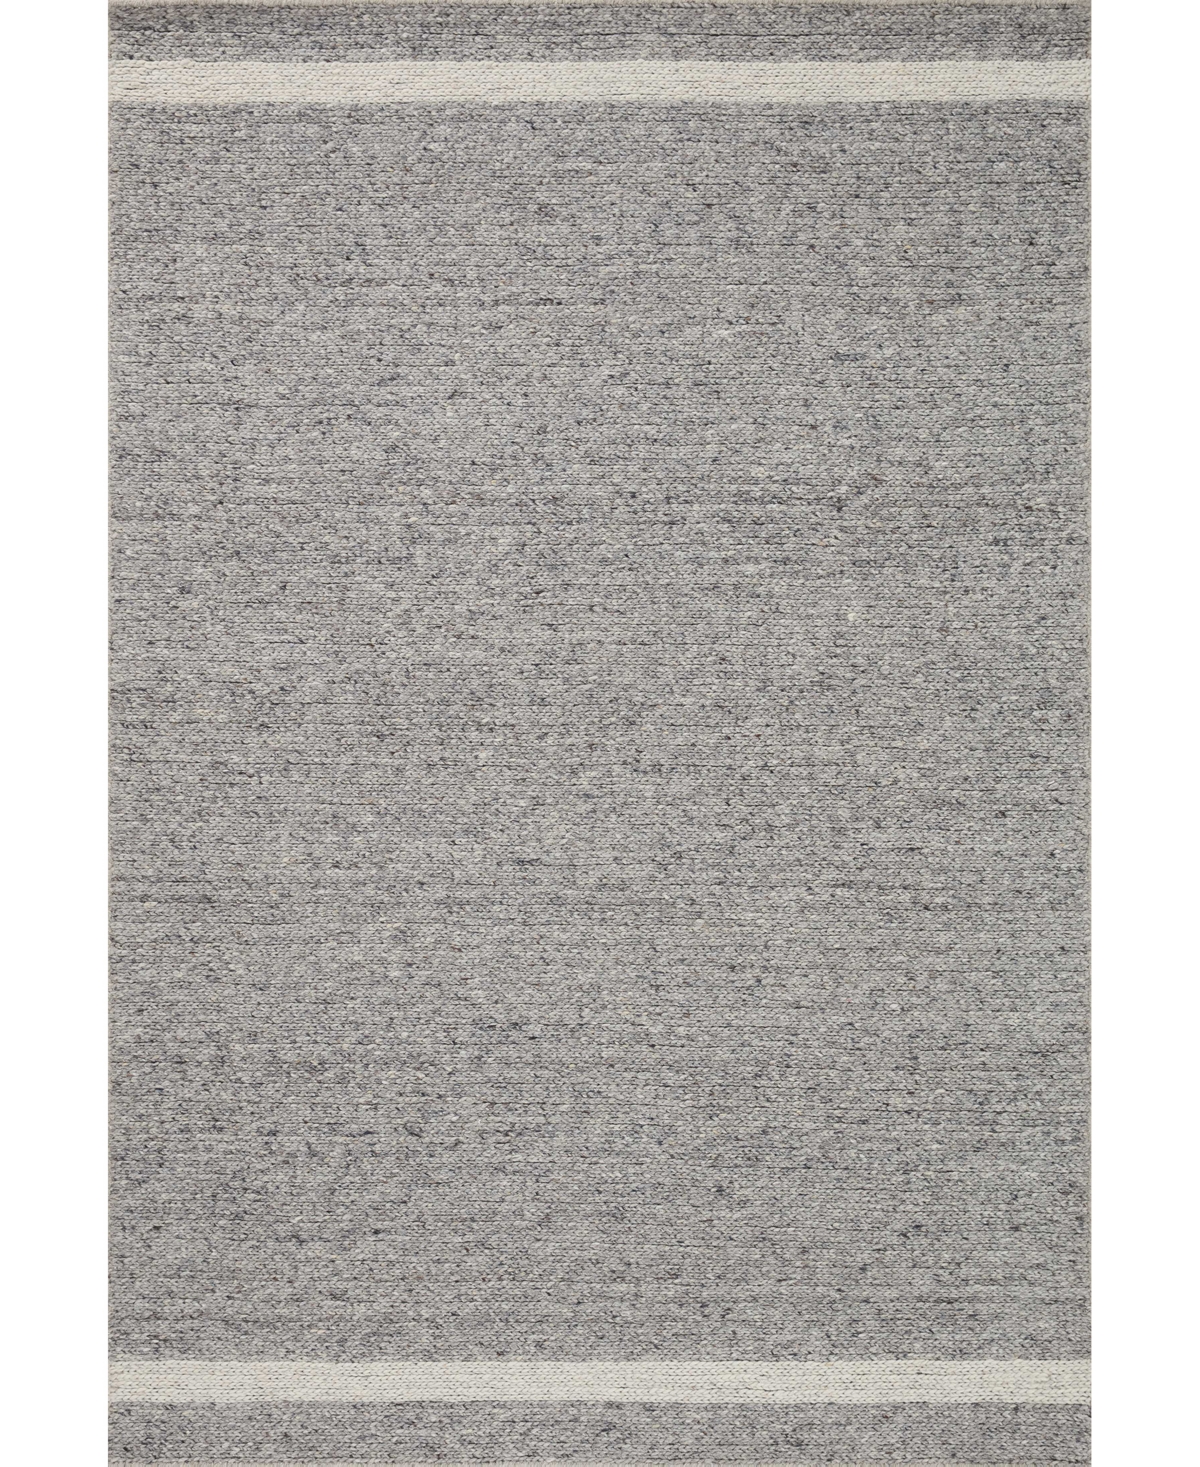 Magnolia Home By Joanna Gaines X Loloi Ashby Ash-04 7'9" X 9'9" Area Rug In Slate